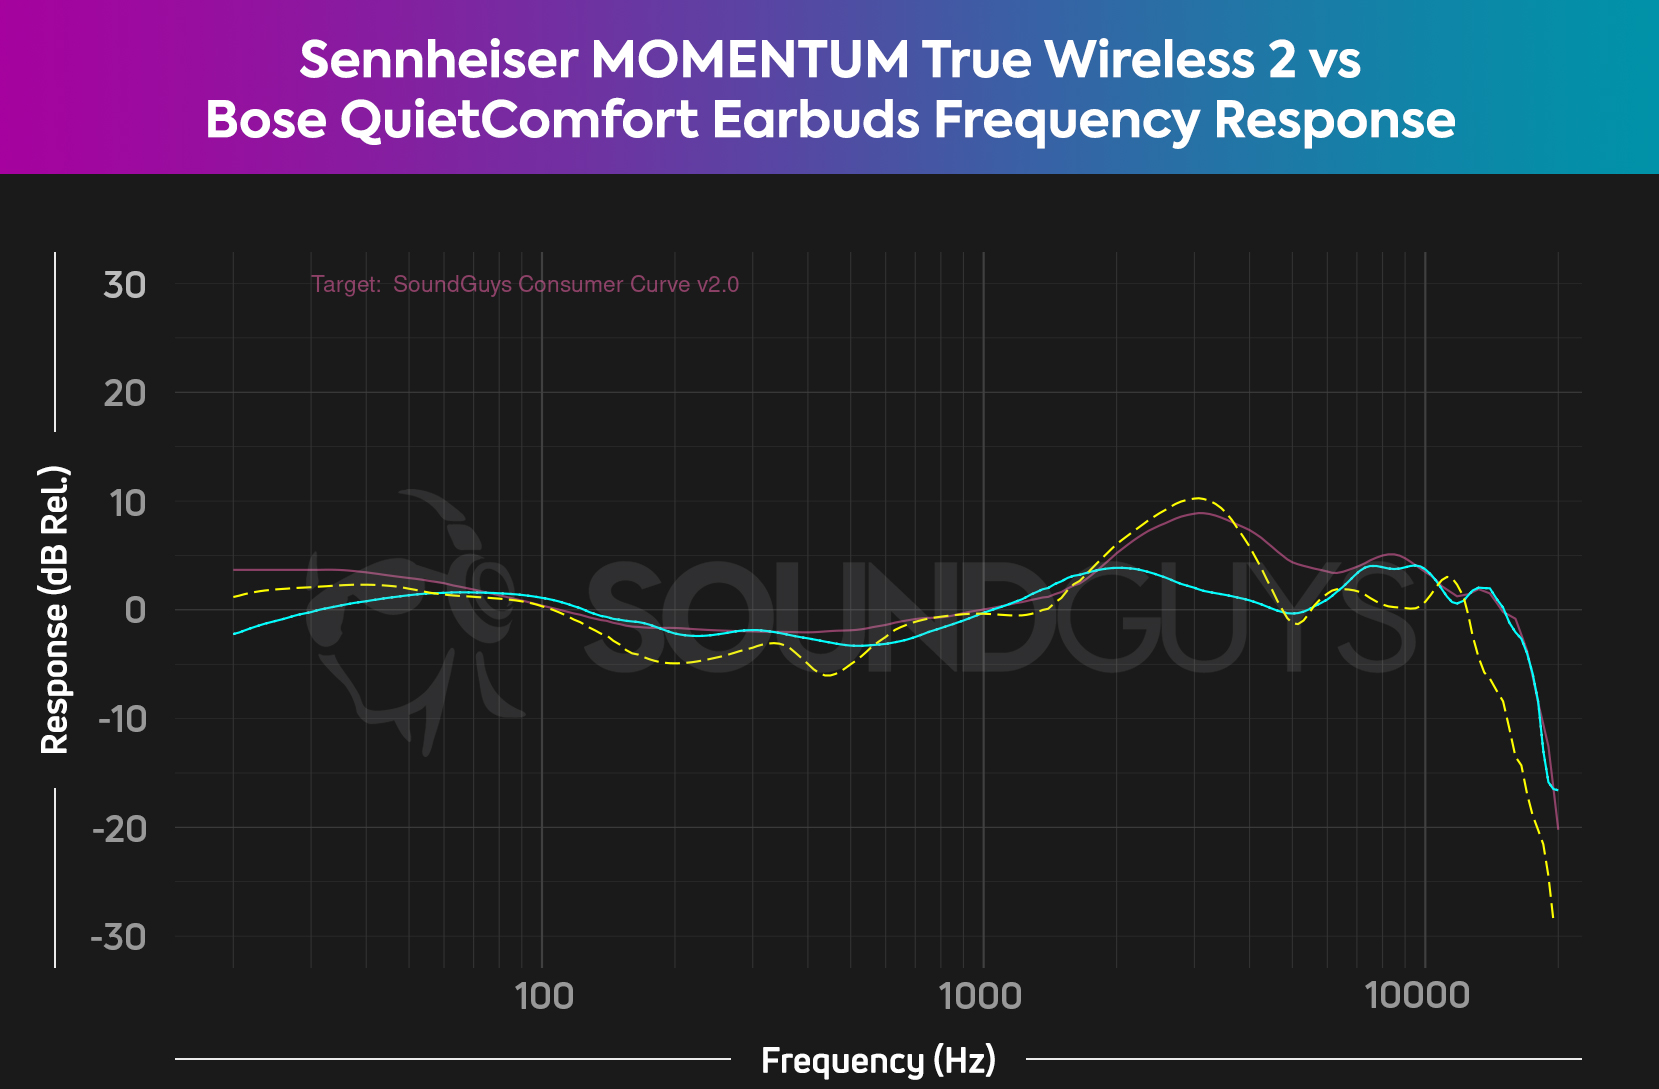 A chart compares the Sennheiser MOMENTUM True Wireless 2 (cyan) to the Bose QuietComfort Earbuds (yellow dash) against the SoundGuys Consumer Curve V2 (pink), illustrating how the Sennheiser earbuds hew closer to our curve.